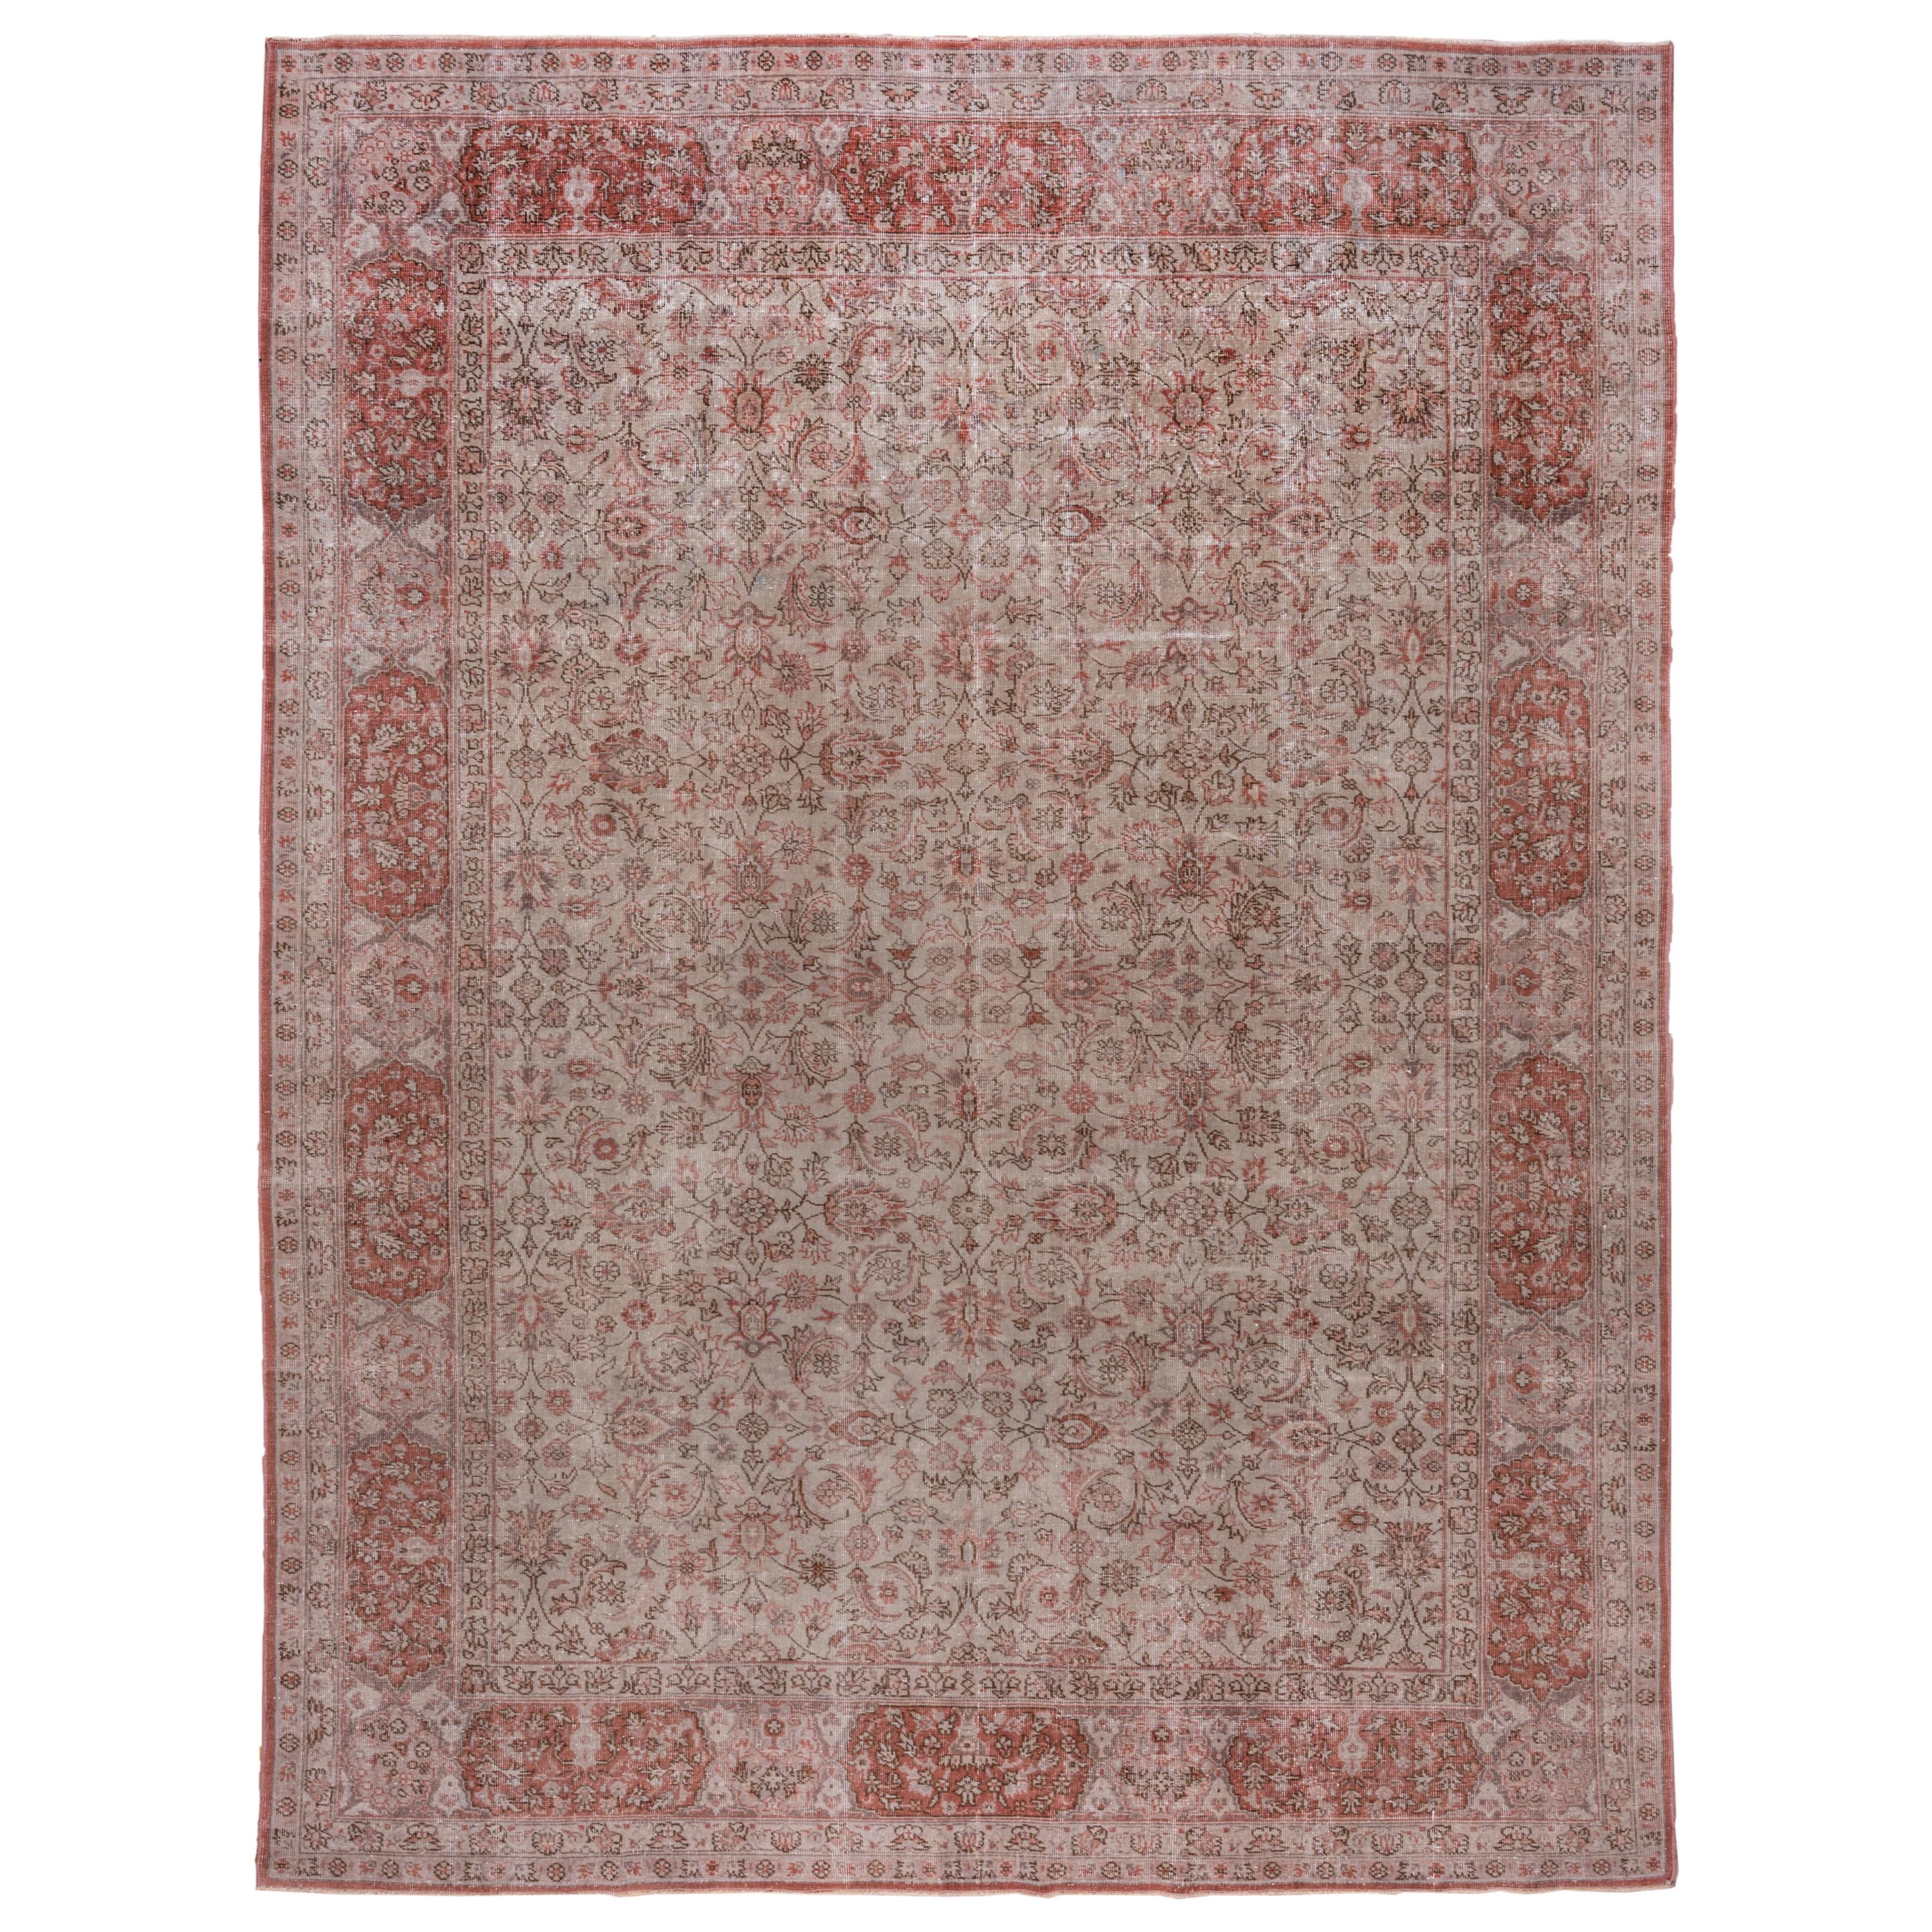 Antique Turkish Oushak Rug, Red Borders, Taupe Allover Field, circa 1940s For Sale